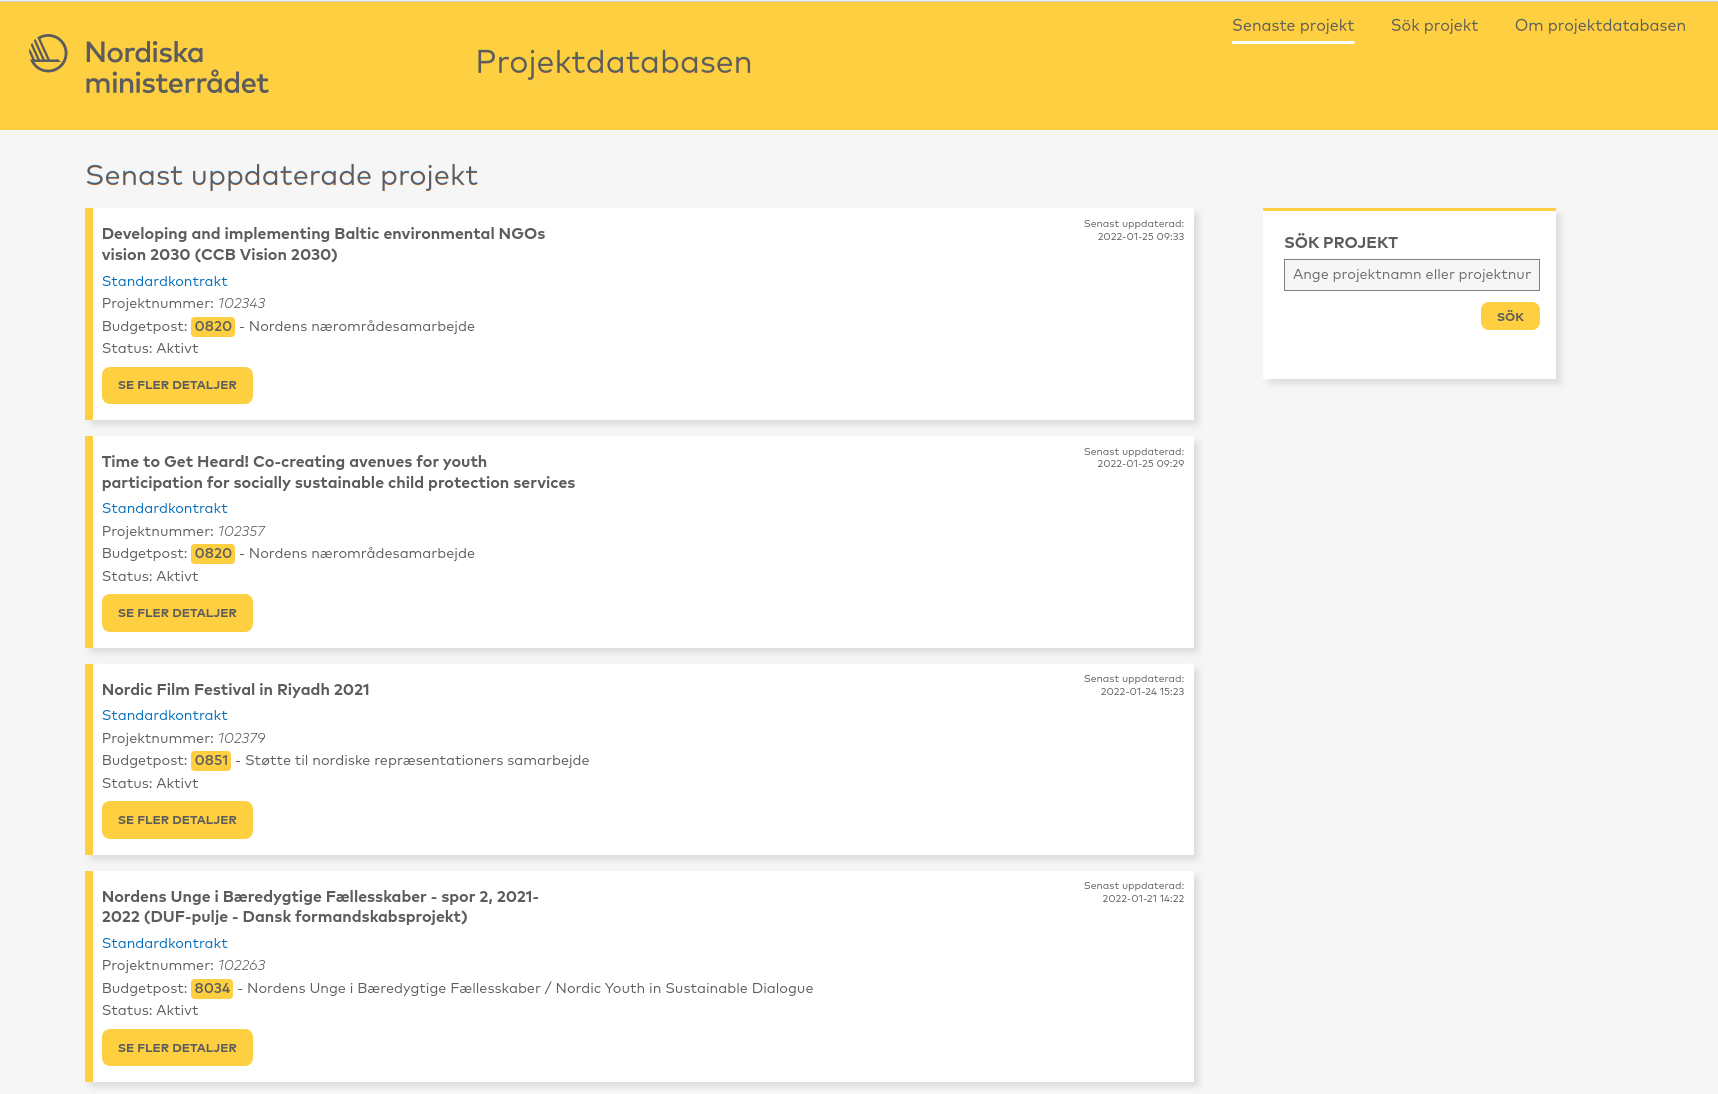 Screenshot of the project database